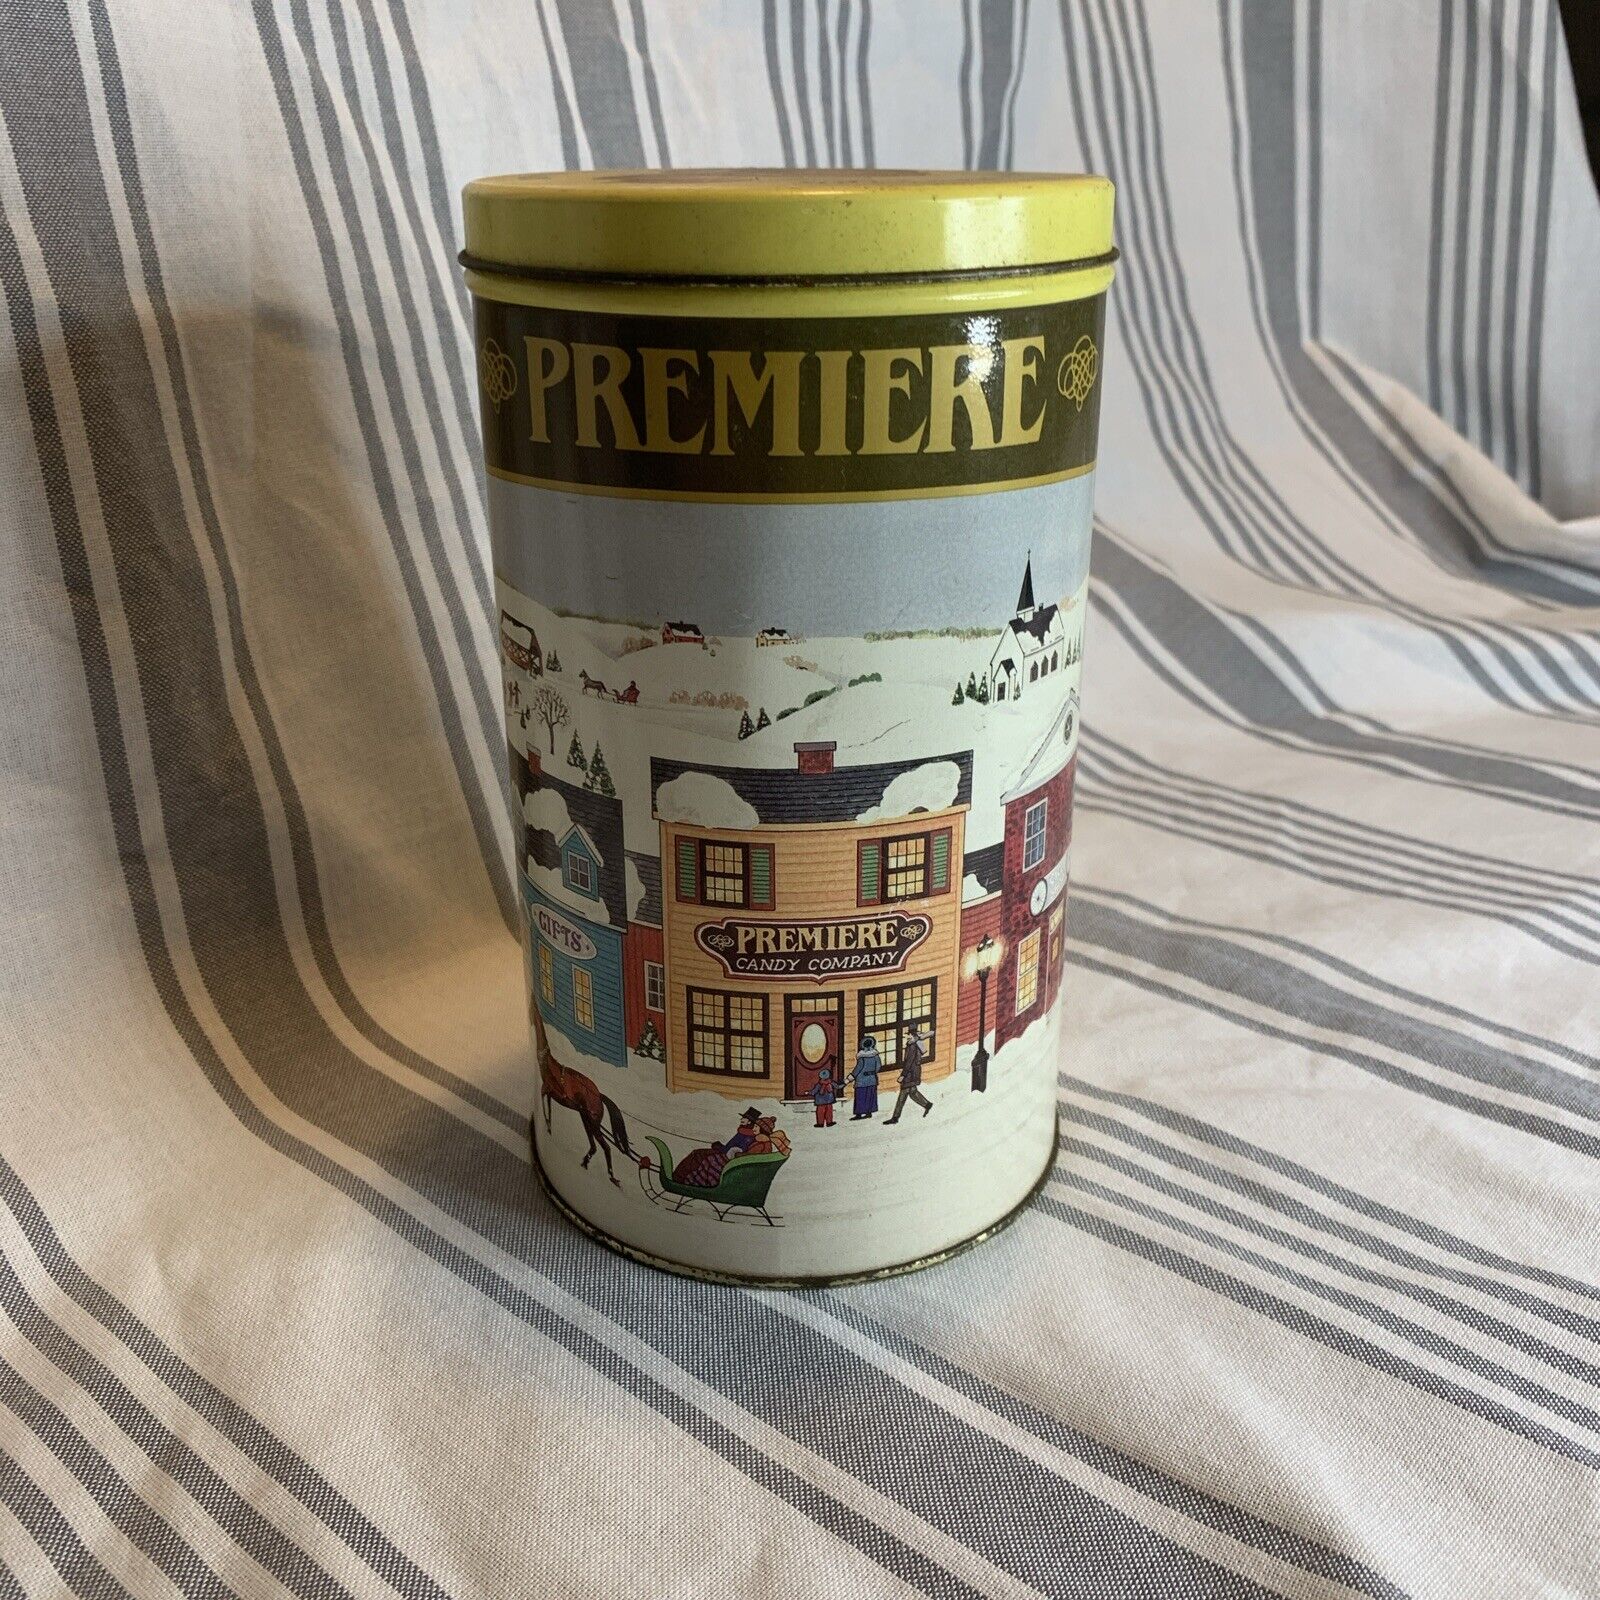 PREMIERE CANDY COMPANY - Hammond, Indiana [Cordial Cherries] Metal Tin - Vintage